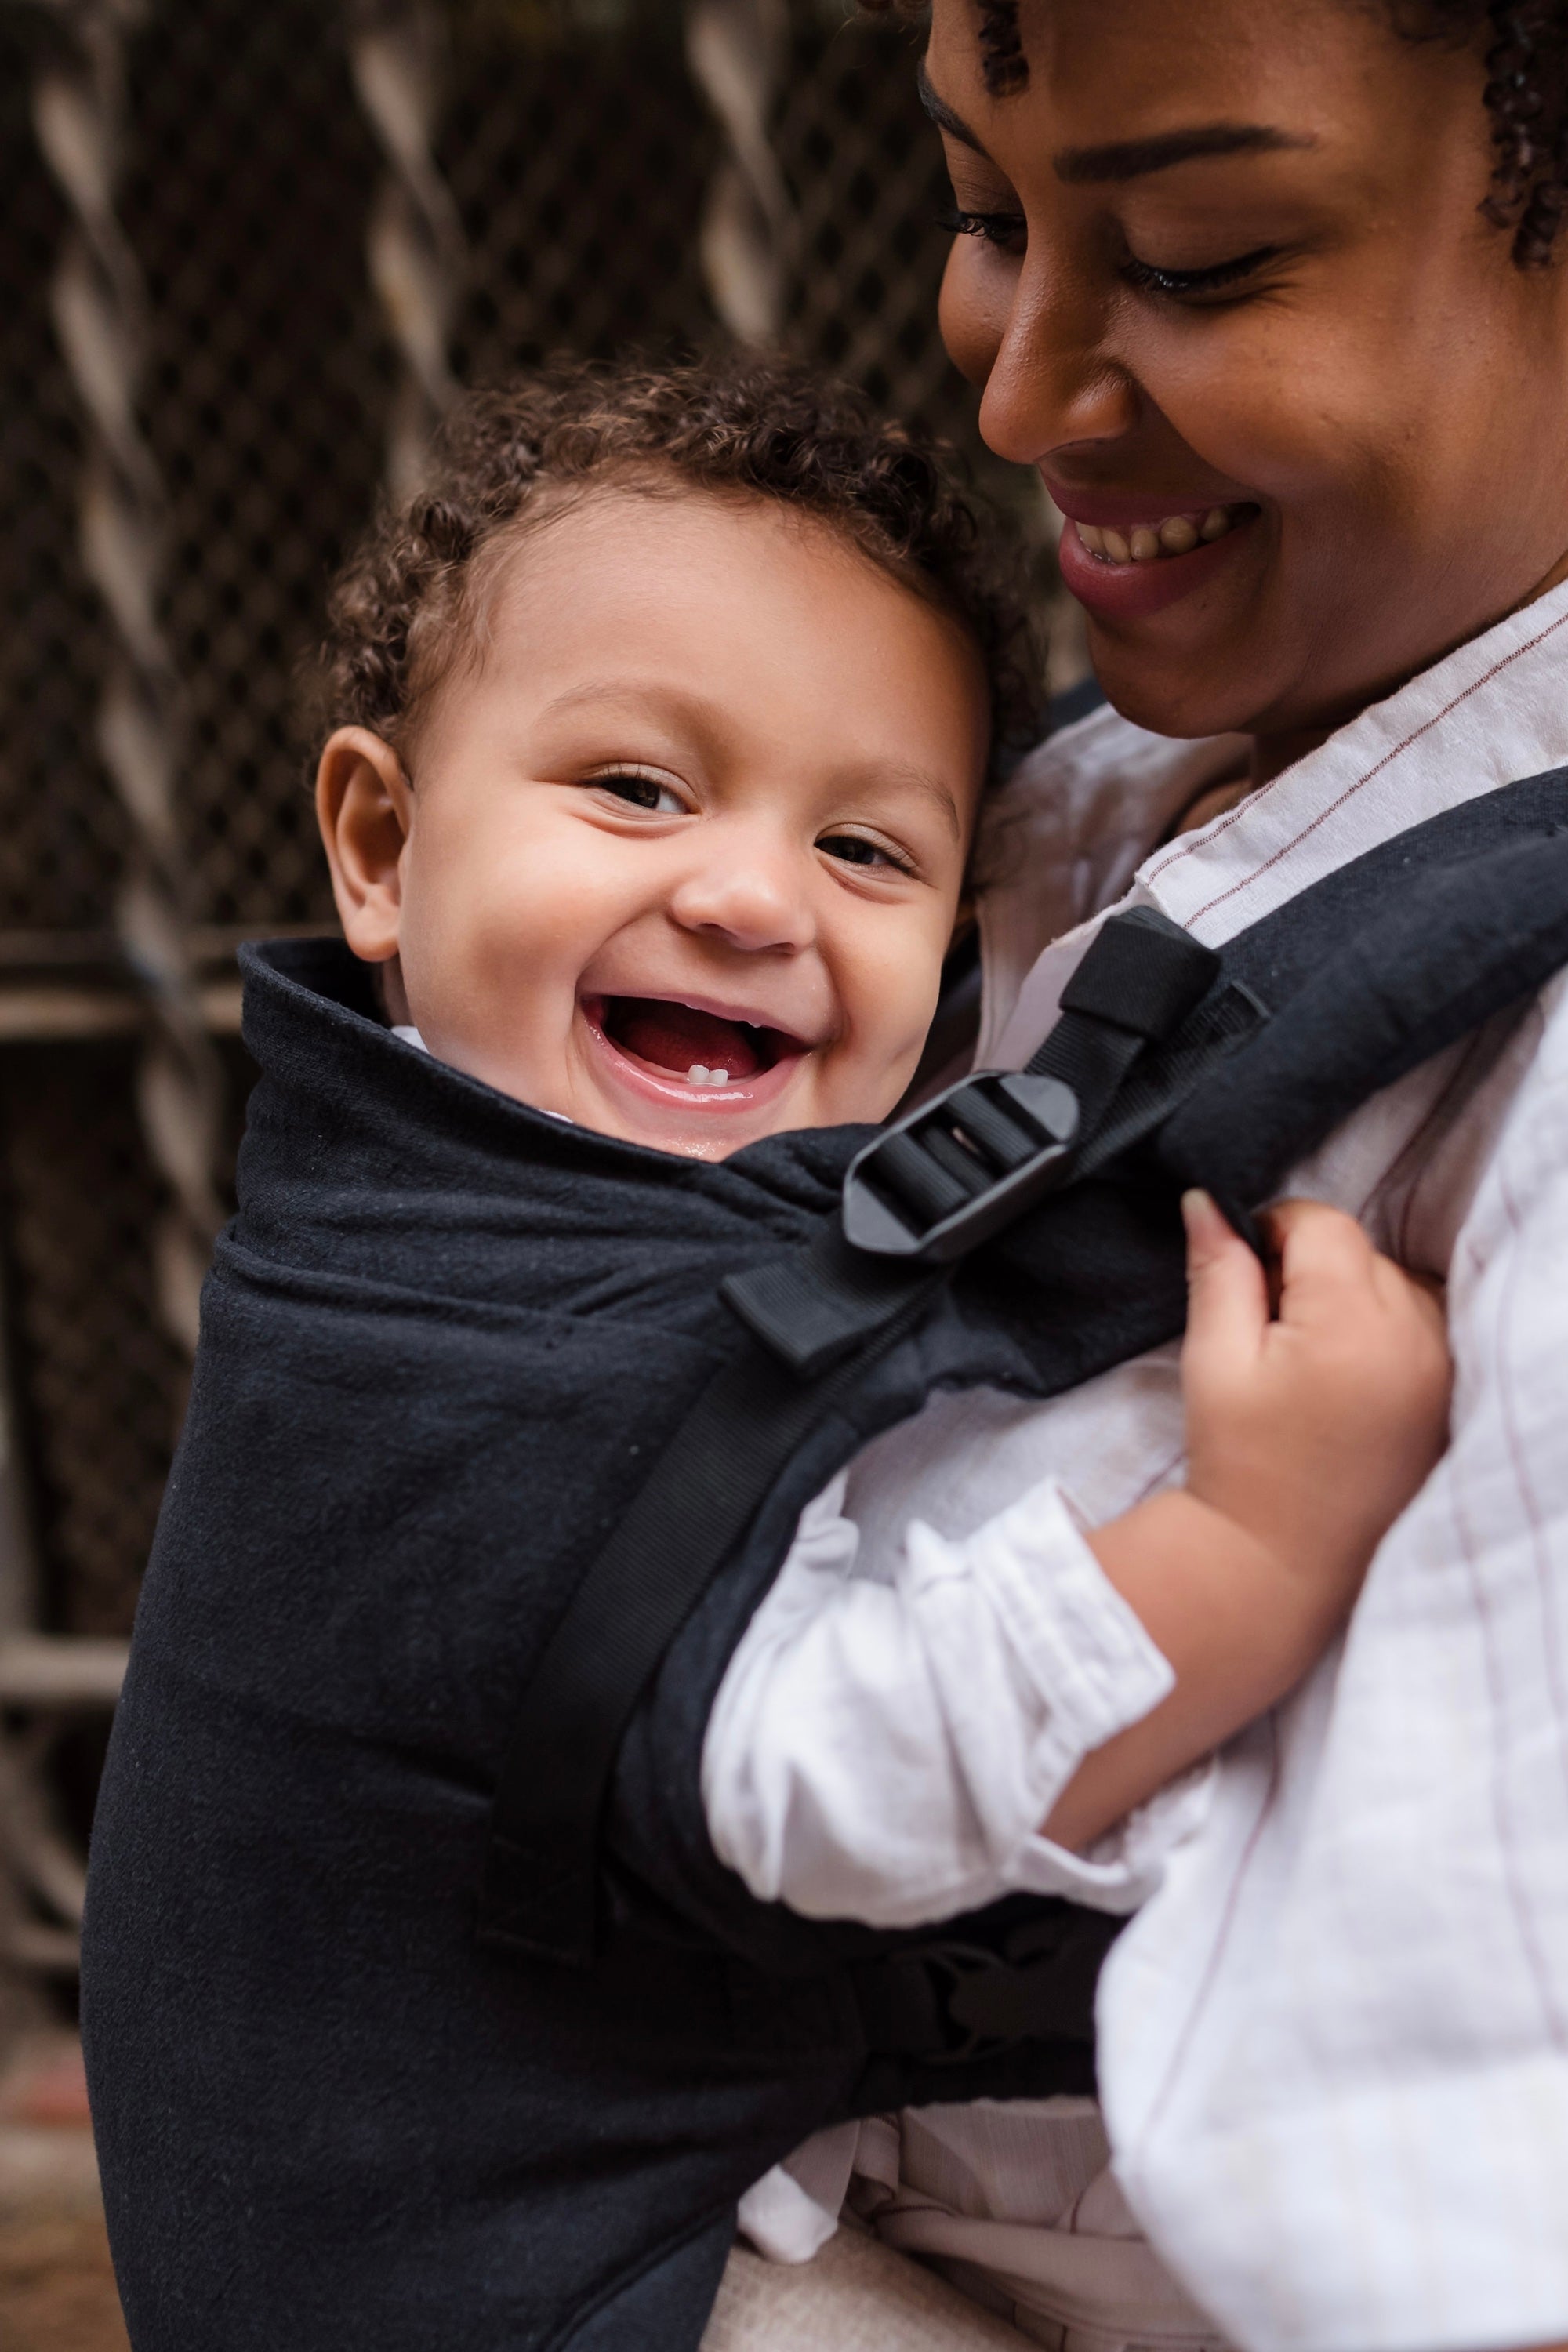 Boba X Baby Carrier Linen Nox. From brand new babies to toddlers - make sure they're comfortable while they grow with the Boba X baby carrier! This adjustable carrier features a linen blend fabric that ensures both you and your child get the all the support you need.